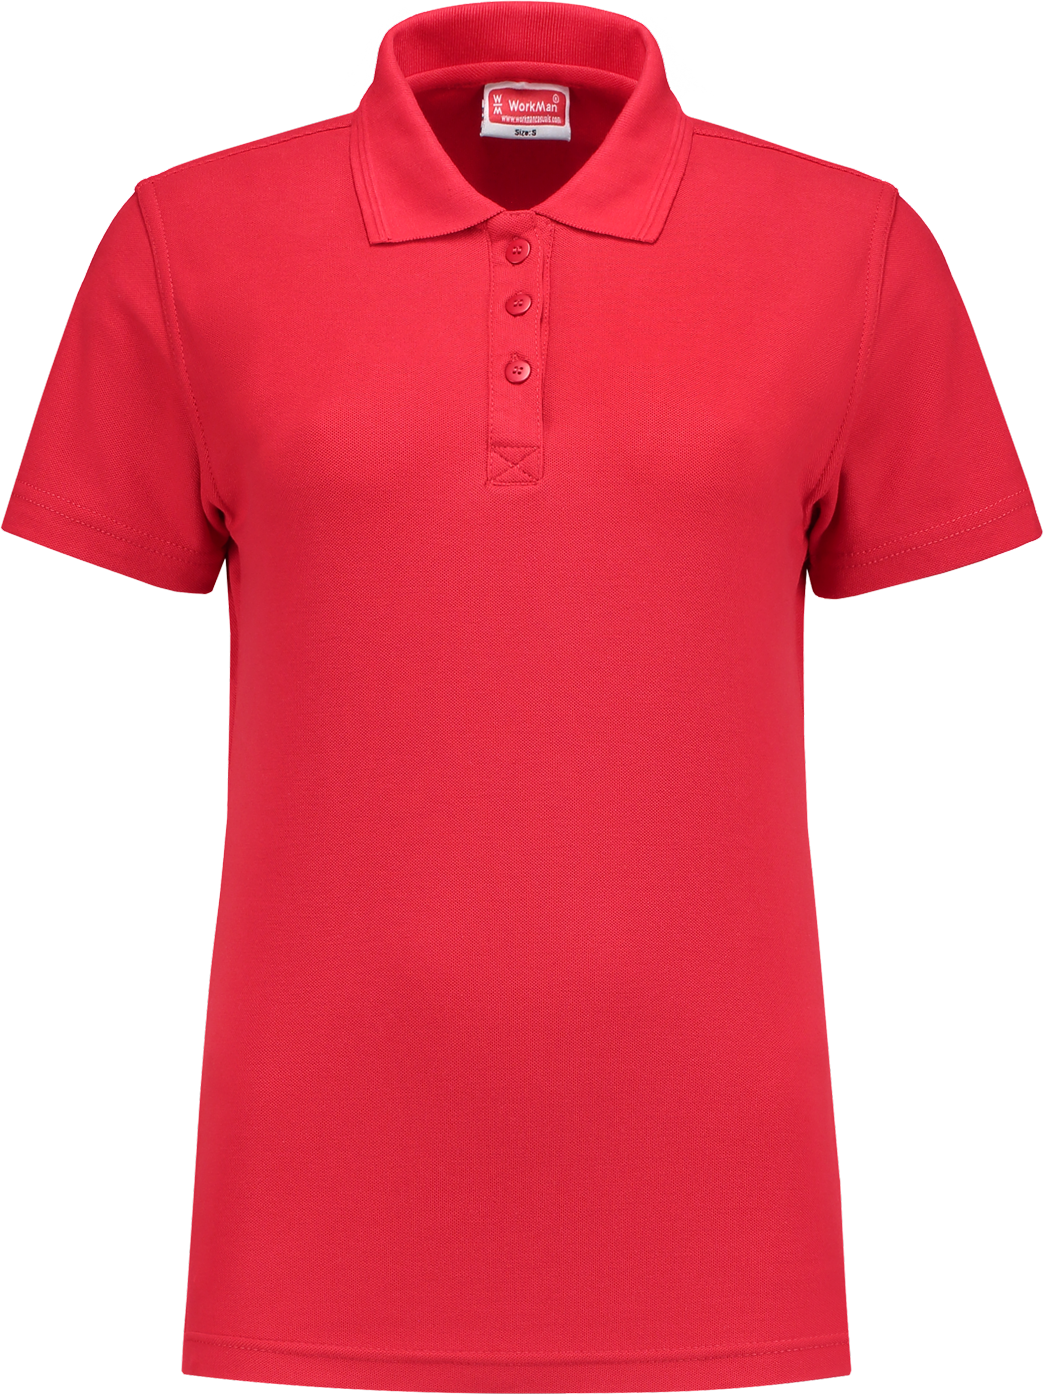 10.6.8103.11 81031 Poloshirt Outfitters Ladies Rood S